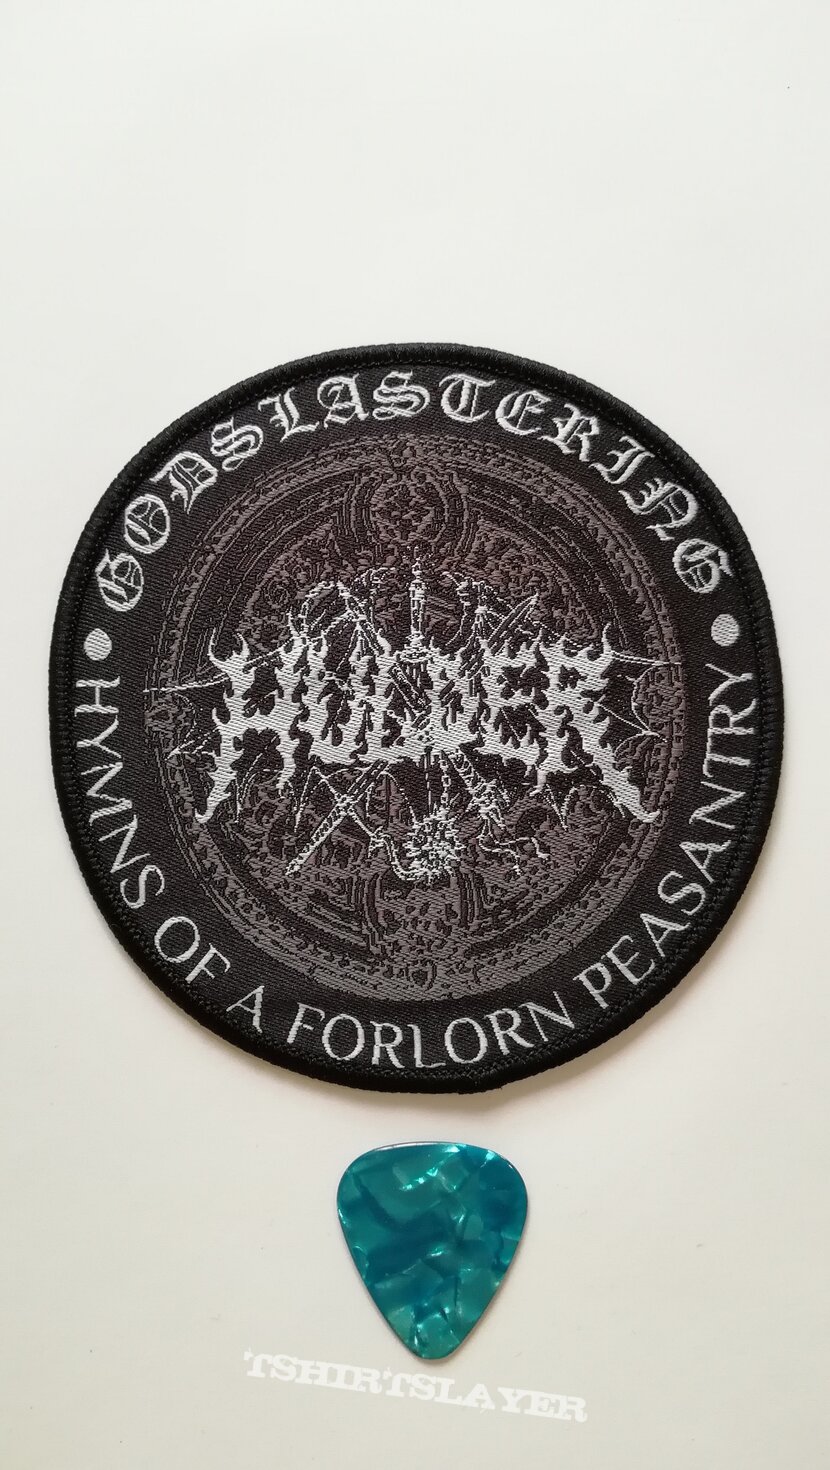 Hulder - Godslastering:Hymns Of A Forlorn Peasantry - Patch 